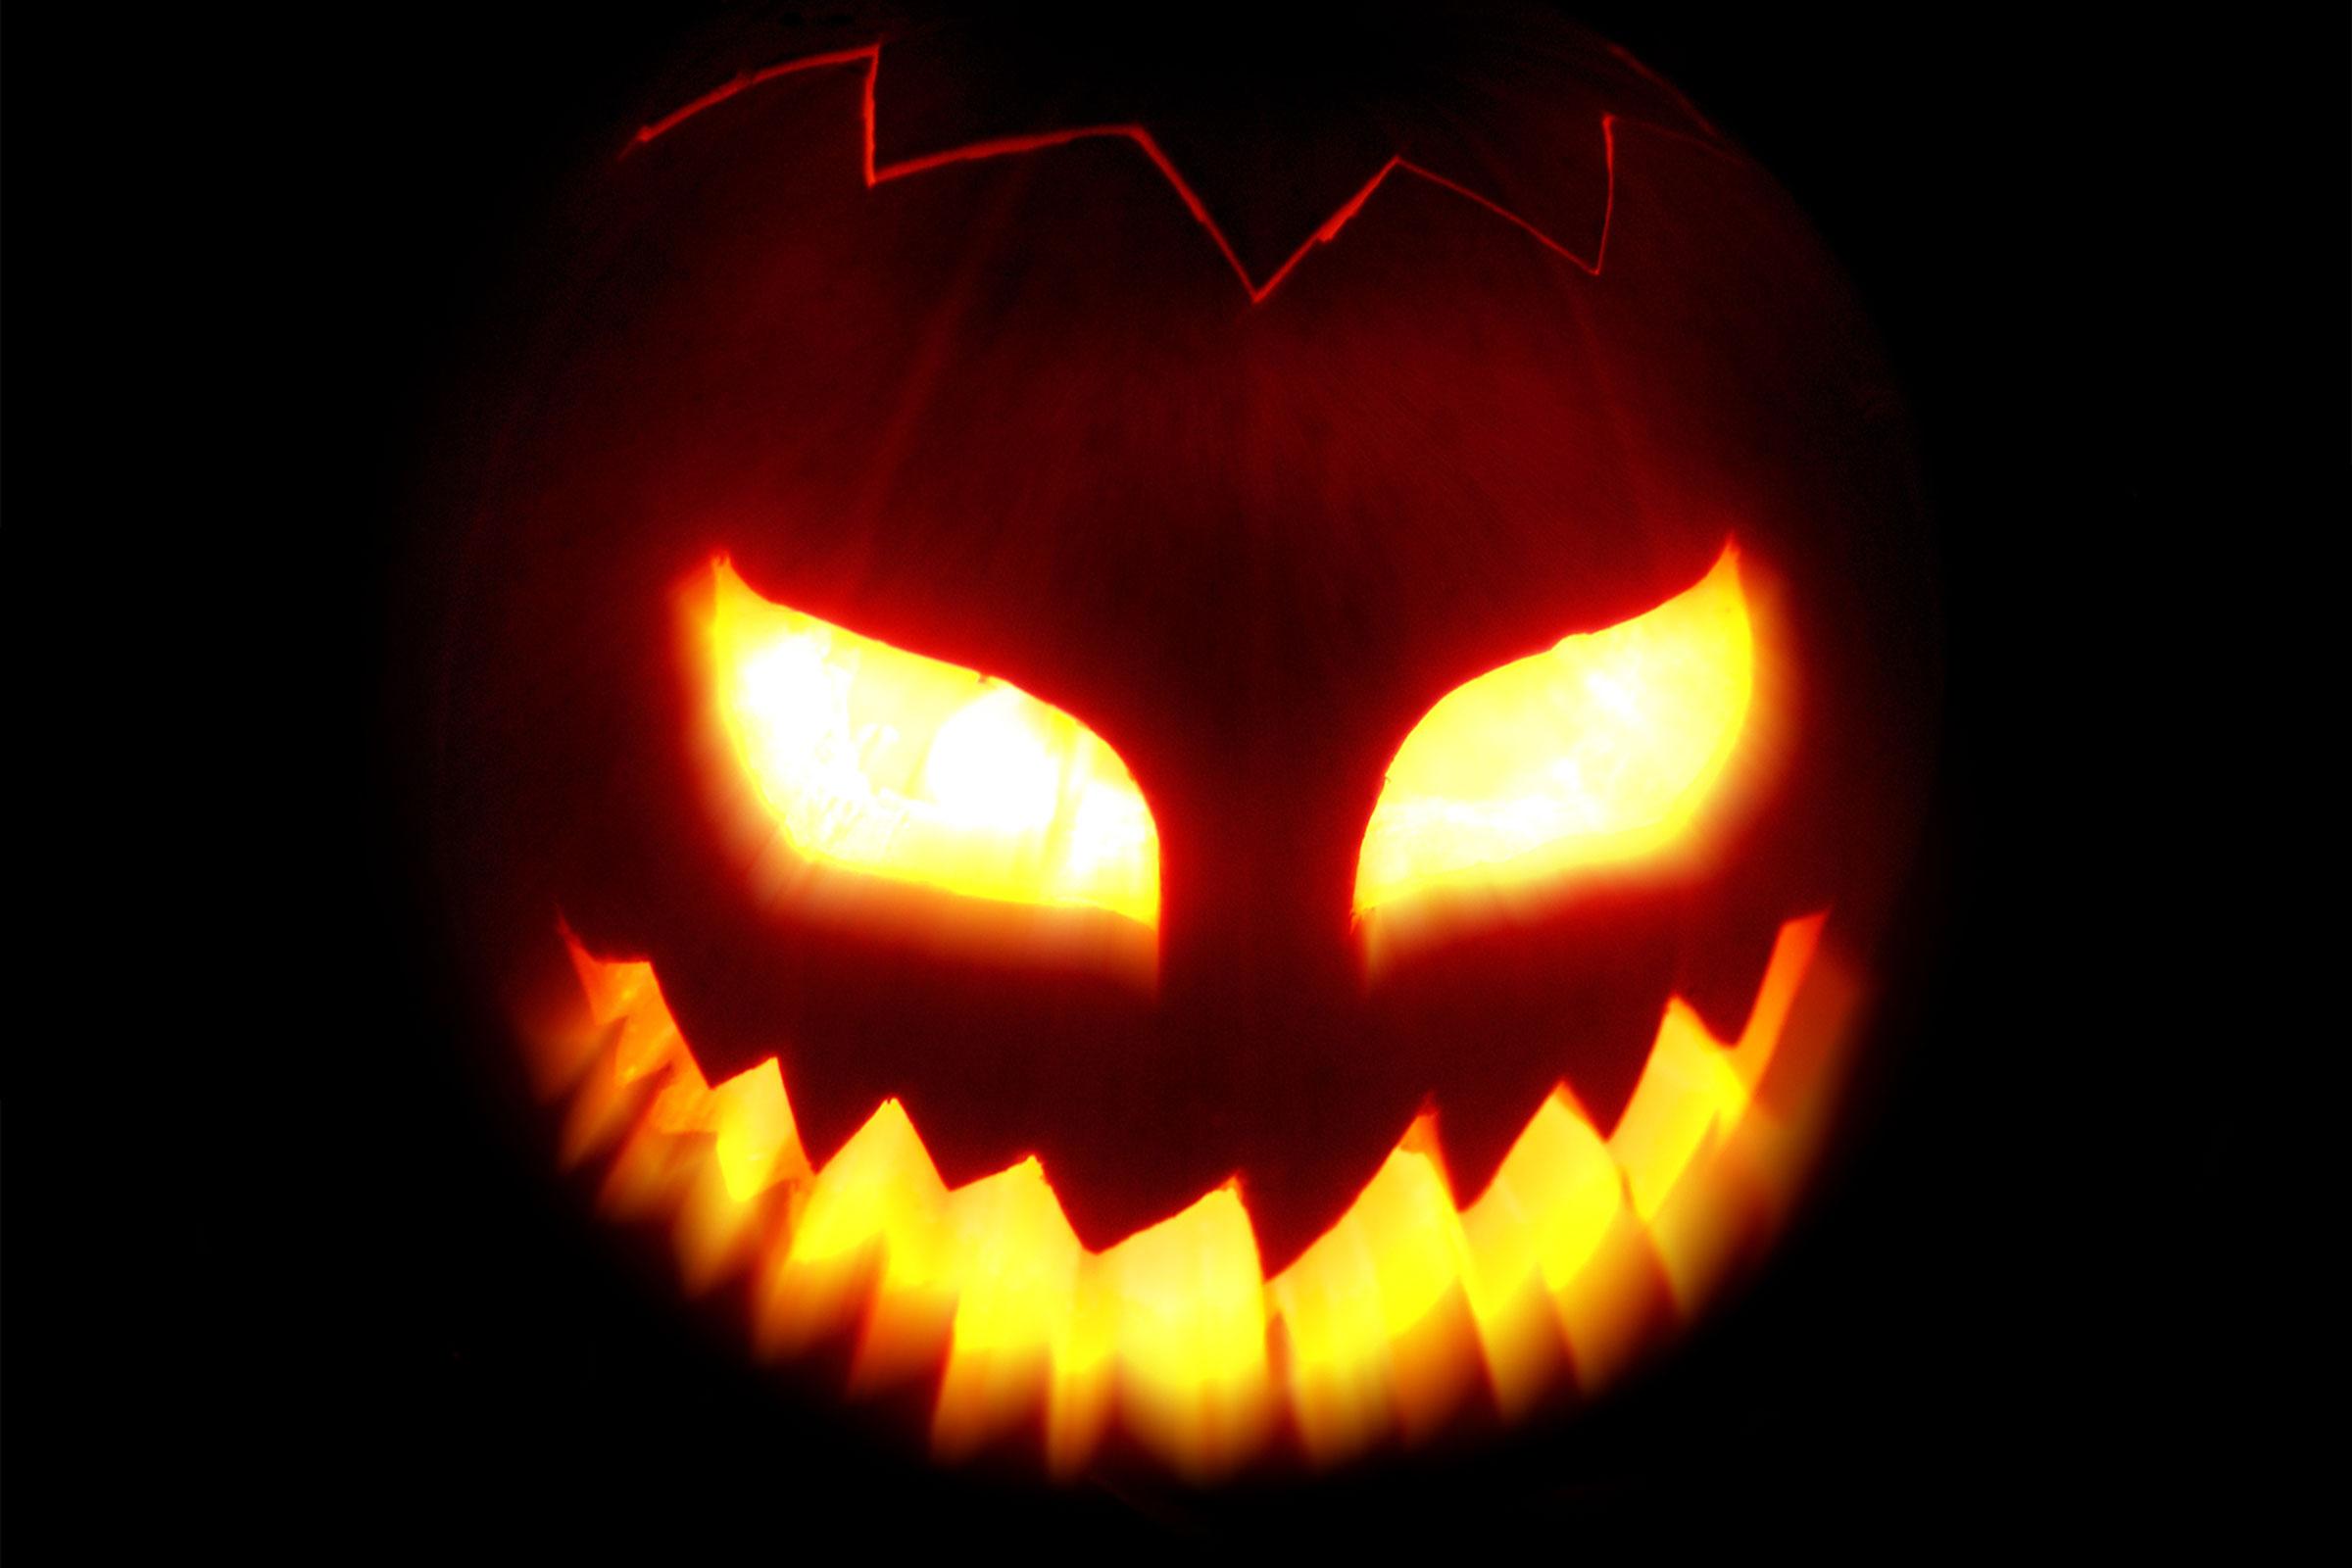 Scary Happy Halloween 2015 Image, Background, Wallpaper, Ideas & Photo